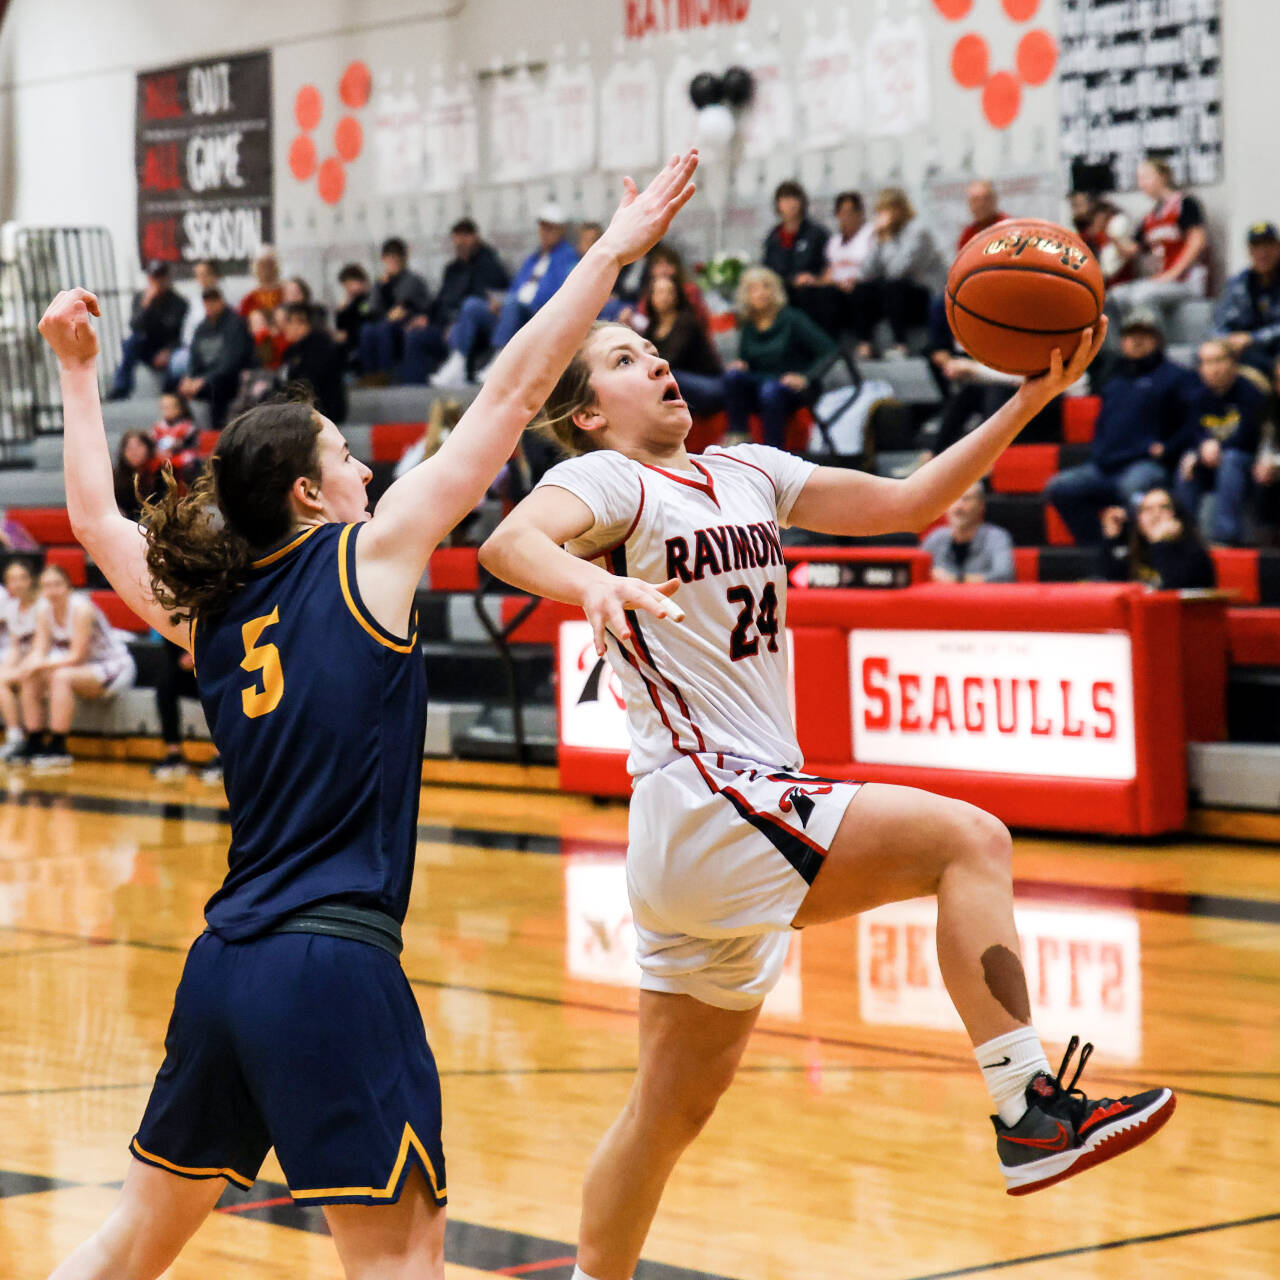 PHOTO BY LARRY BALE Raymond’s Karsyn Freeman (24) drives to the basket against Forks’ Kiera Johnson during the Seagulls’ 64-41 win on Tuesday at Raymond High School.